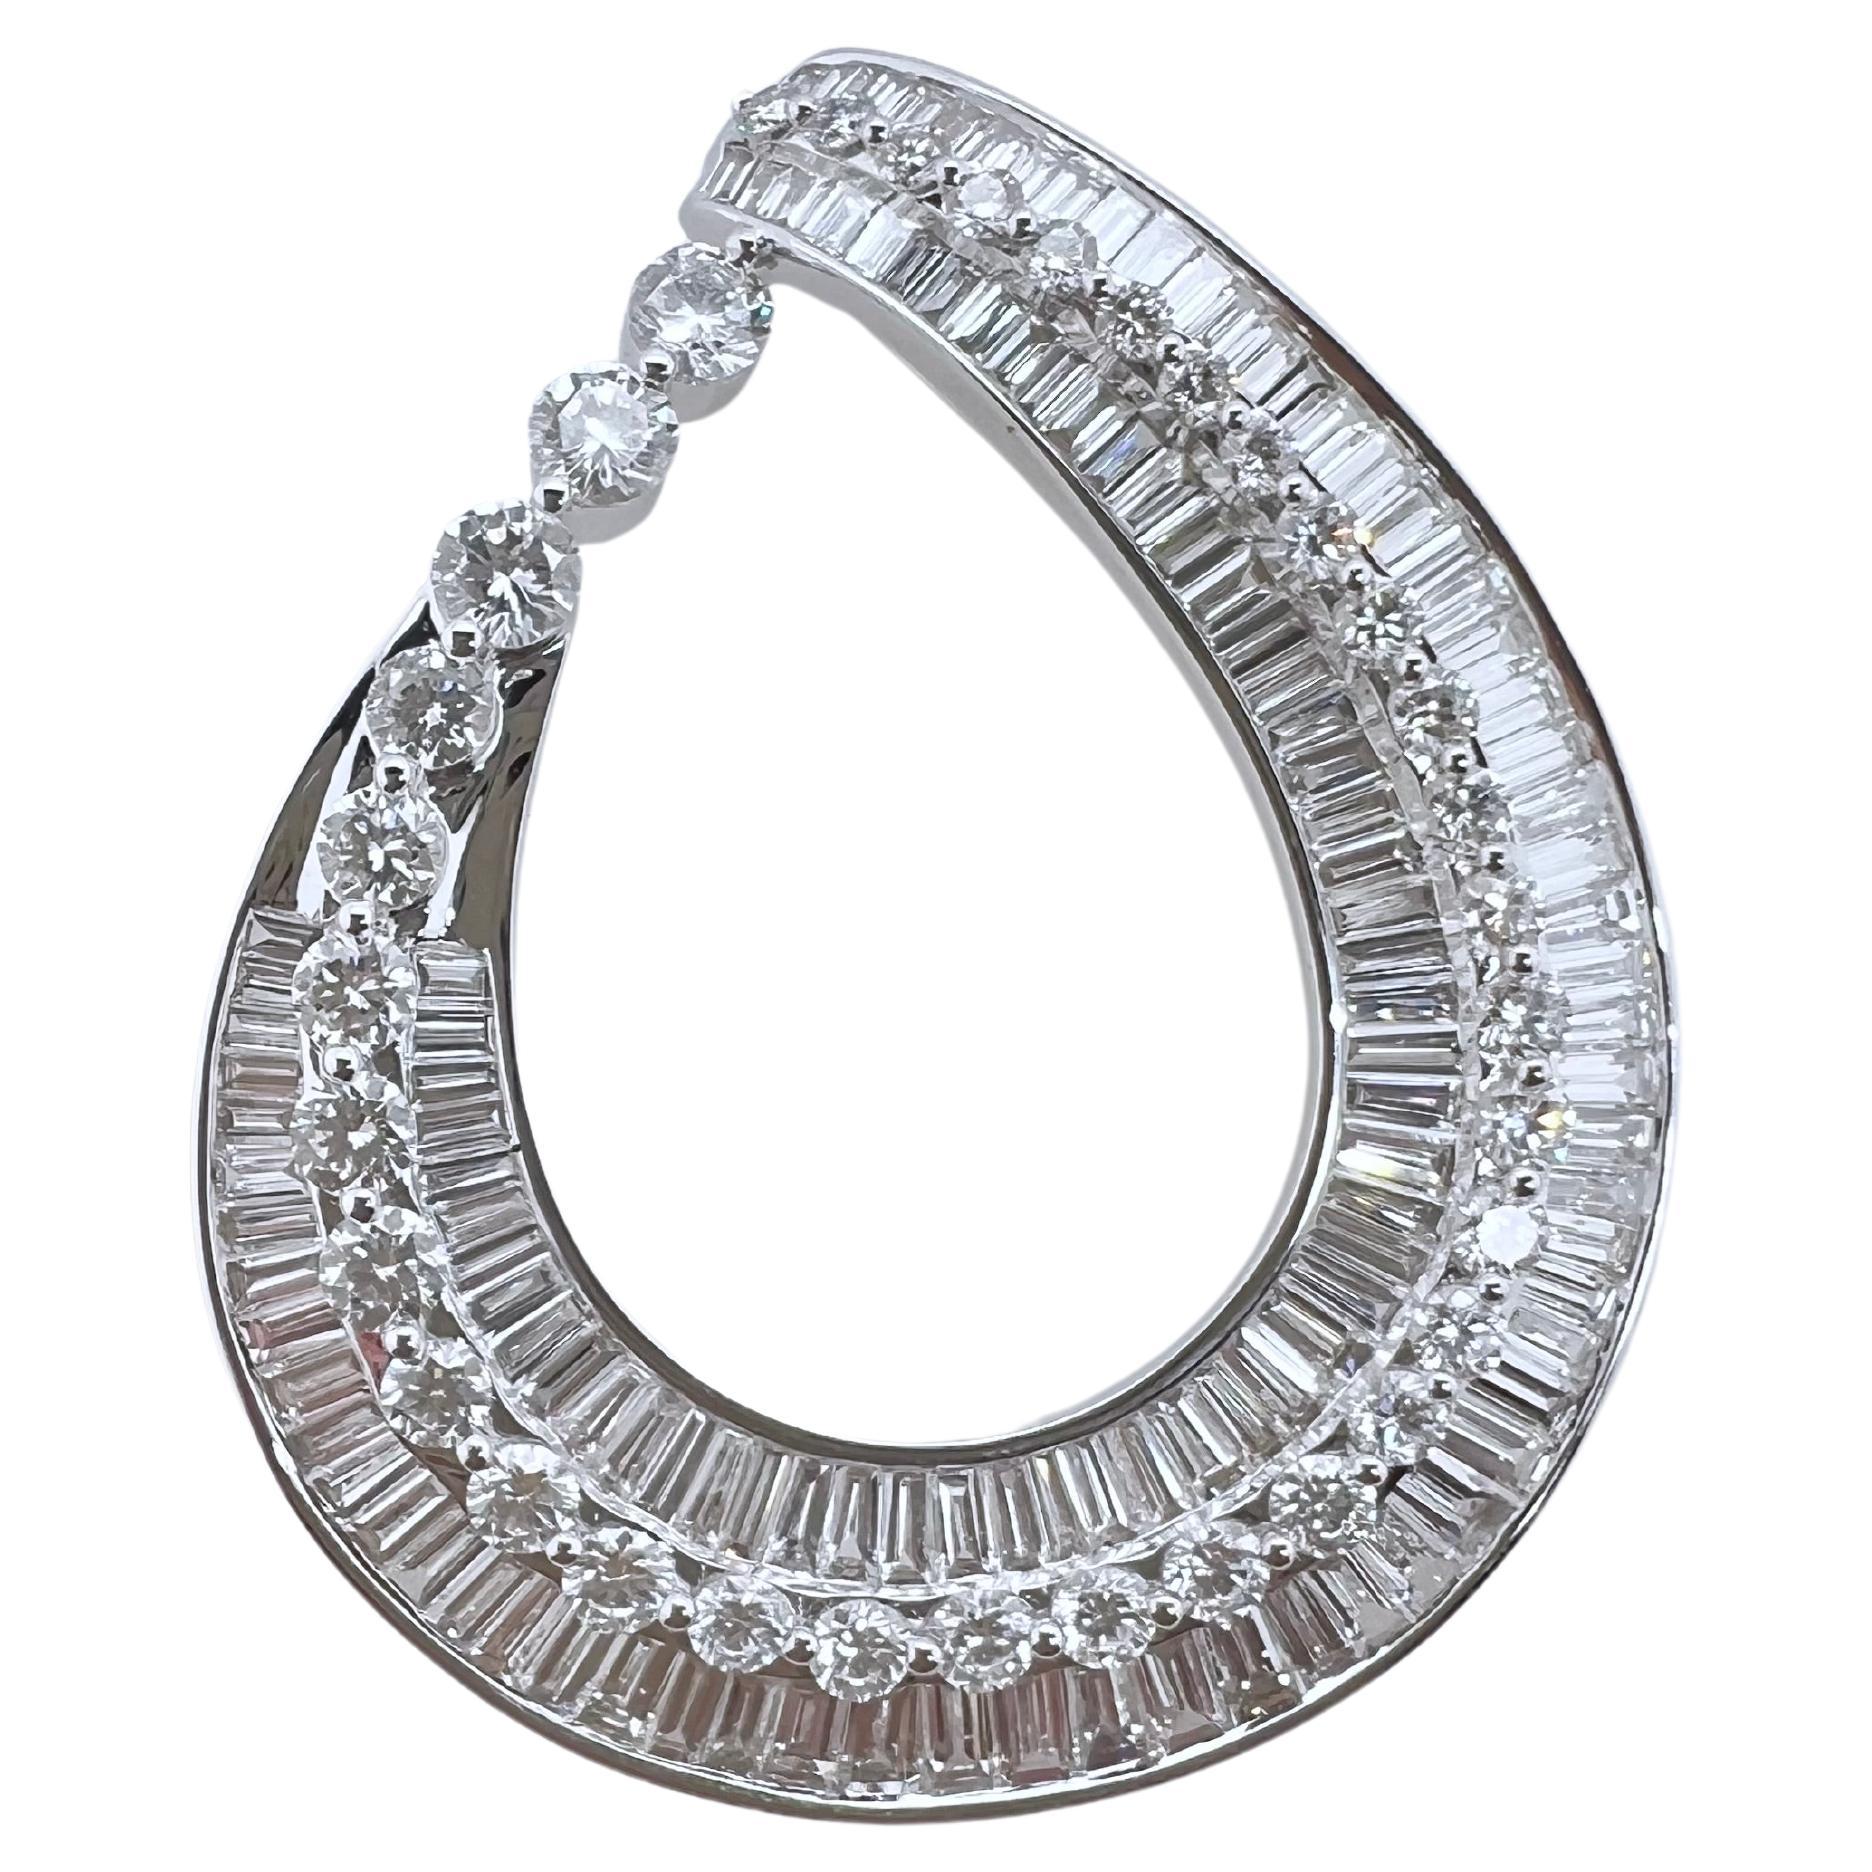 This 18k white gold tear drop shaped diamond baguette and round brilliant is absolutely stunning! The baguettes are channeled set while the round brilliant diamonds are strategically placed like a line on top of the baguettes. Extremely difficult to